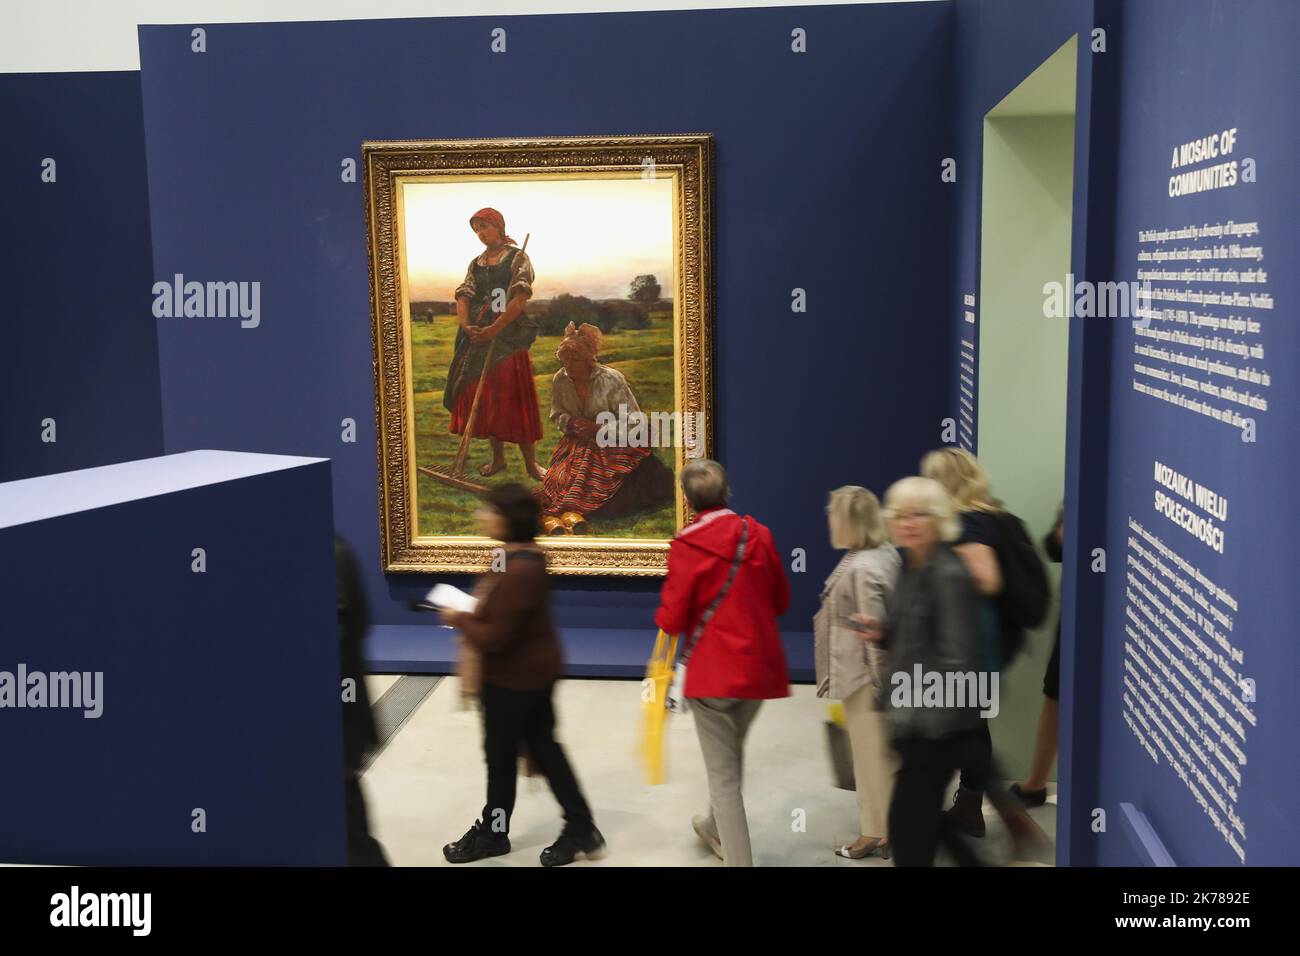 Lens, France, sept 24th 2019 - Louvre Lens Museum POLOGNE, 1840 - 1918 PAINTING THE SOUL OF A NATION The year 2019 marks the centenary of the signing, on 3 September 1919, of the agreement between France and Poland “concerning emigration and immigration”. It led to the arrival of large numbers of Polish workers in France, notably in the mining region in the north of the country.  Stock Photo